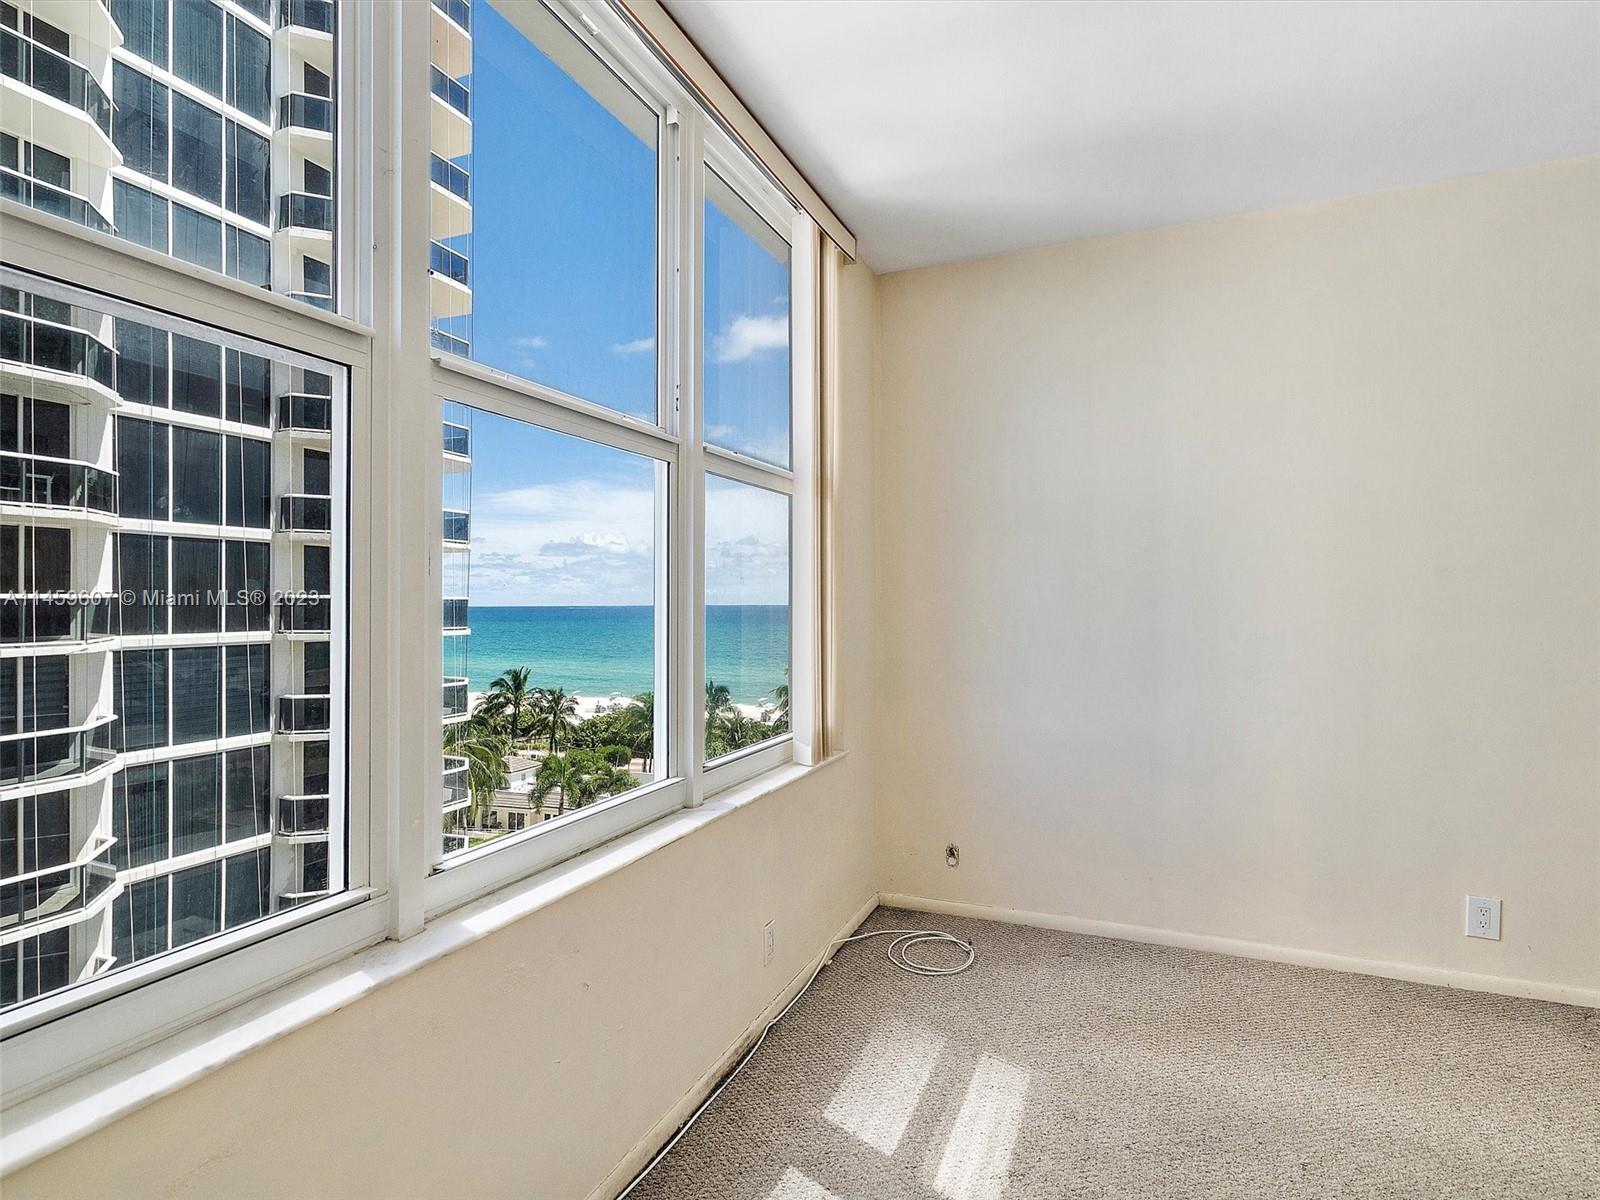 Discover this spacious 1 bedroom, 1 bathroom condo located in an oceanfront building in the heart of